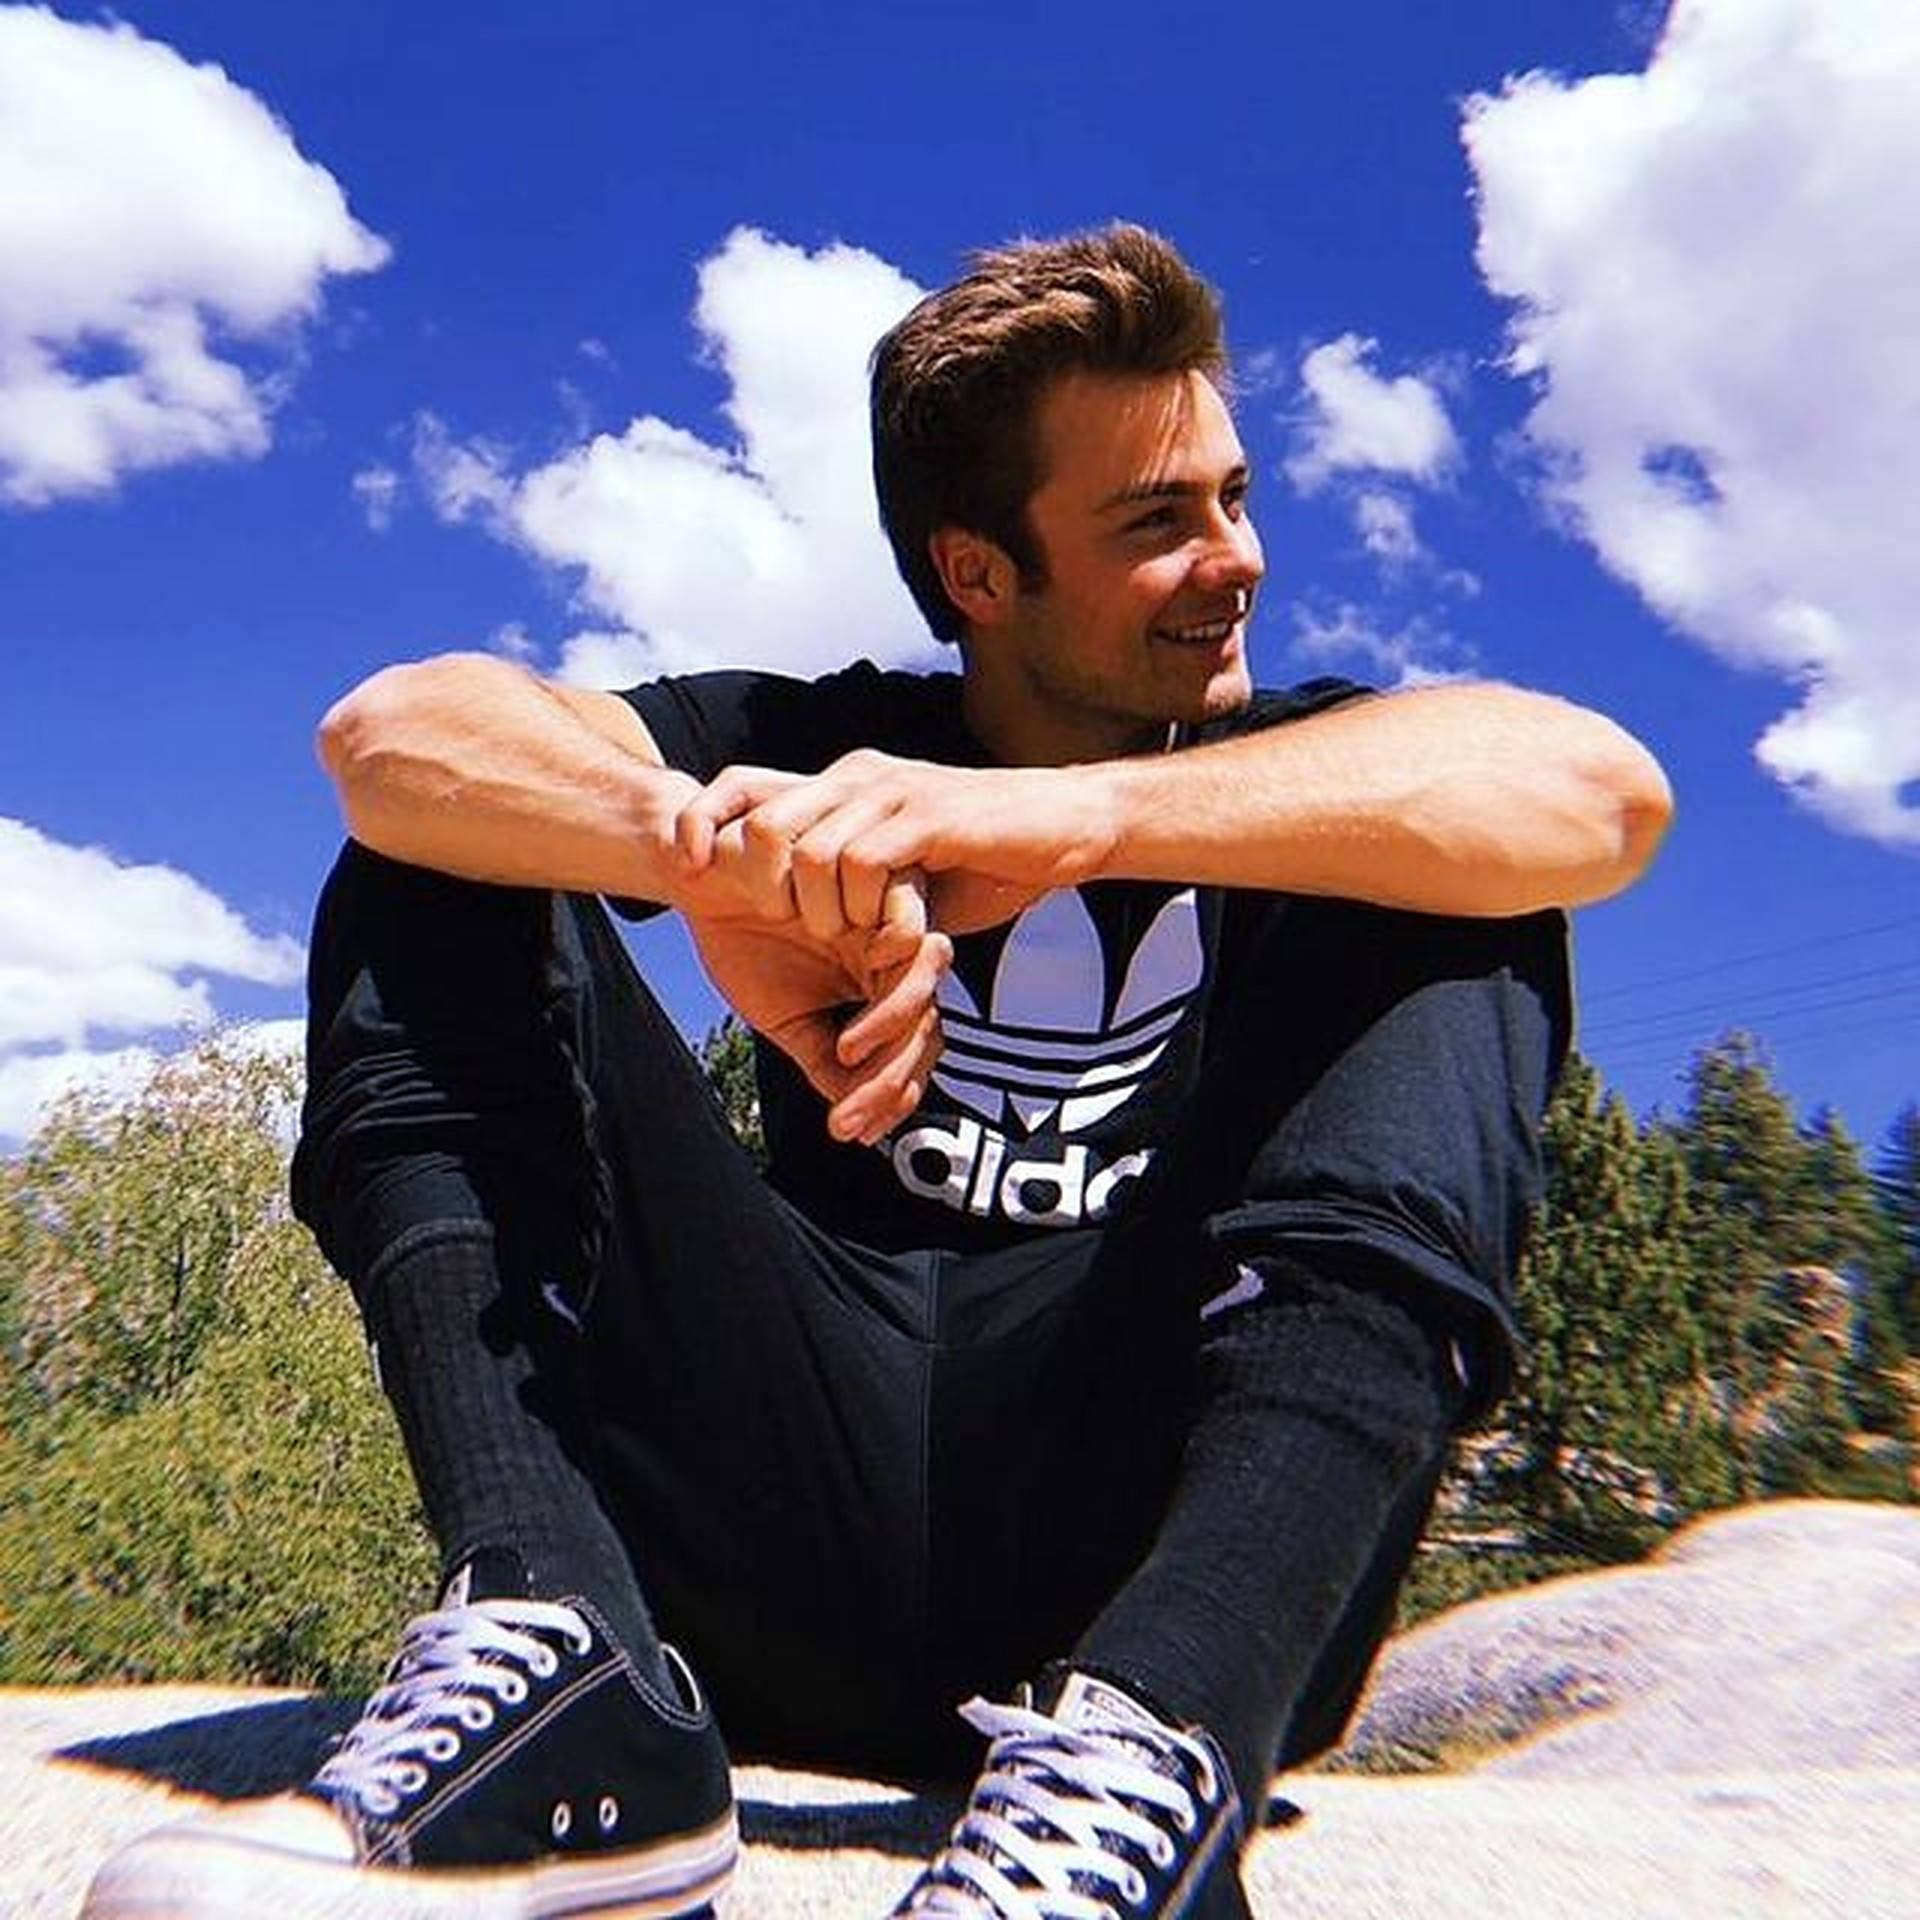 Peytonmeyer Adidas - This Phrase Does Not Require Any Translation As It Consists Of A Name And A Brand Which Are Typically Used In English In The German-speaking Regions As Well. However, If You Are Referring To A Computer Or Mobile Wallpaper Featuring Peyton Meyer Wearing Adidas Clothing, You Could Say 